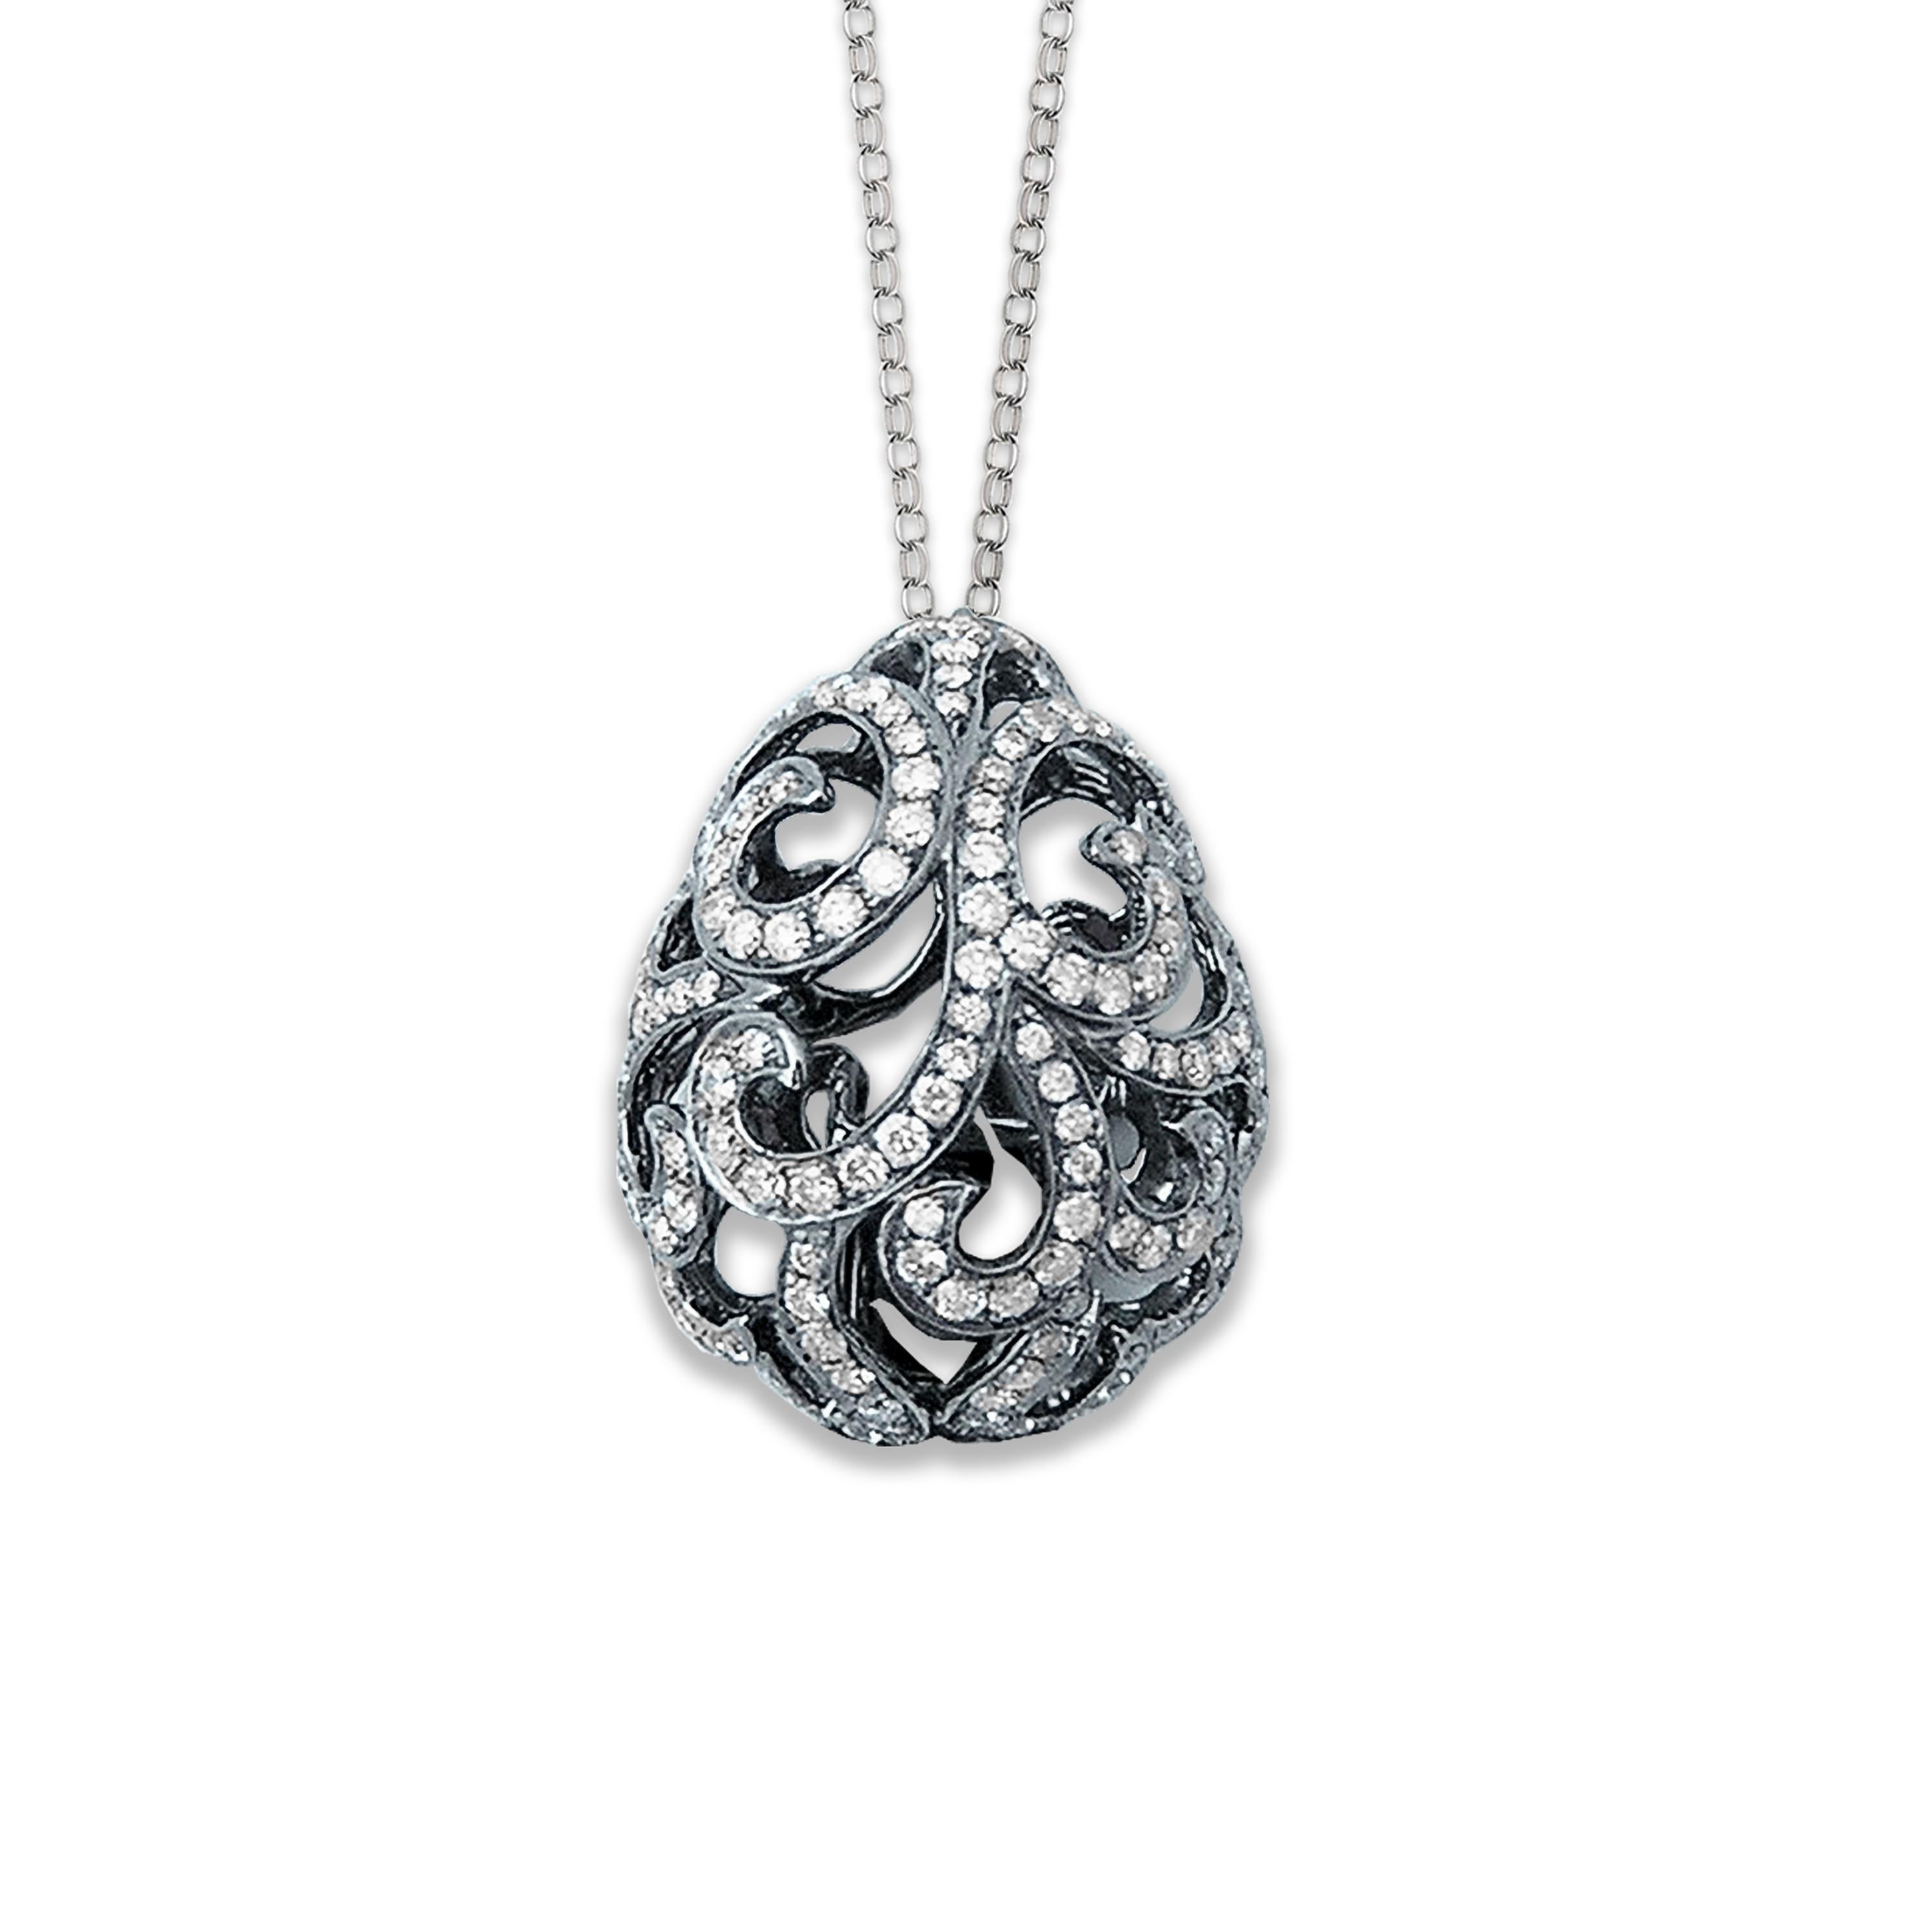 Description:
Emulating femininity and glamour, the Whispering collection is full of colour and form. Inspired by the twisting, sculptural shape of the exotic Orchid flower. Whispering large filigree egg pendant with 0.65ct white diamonds set in